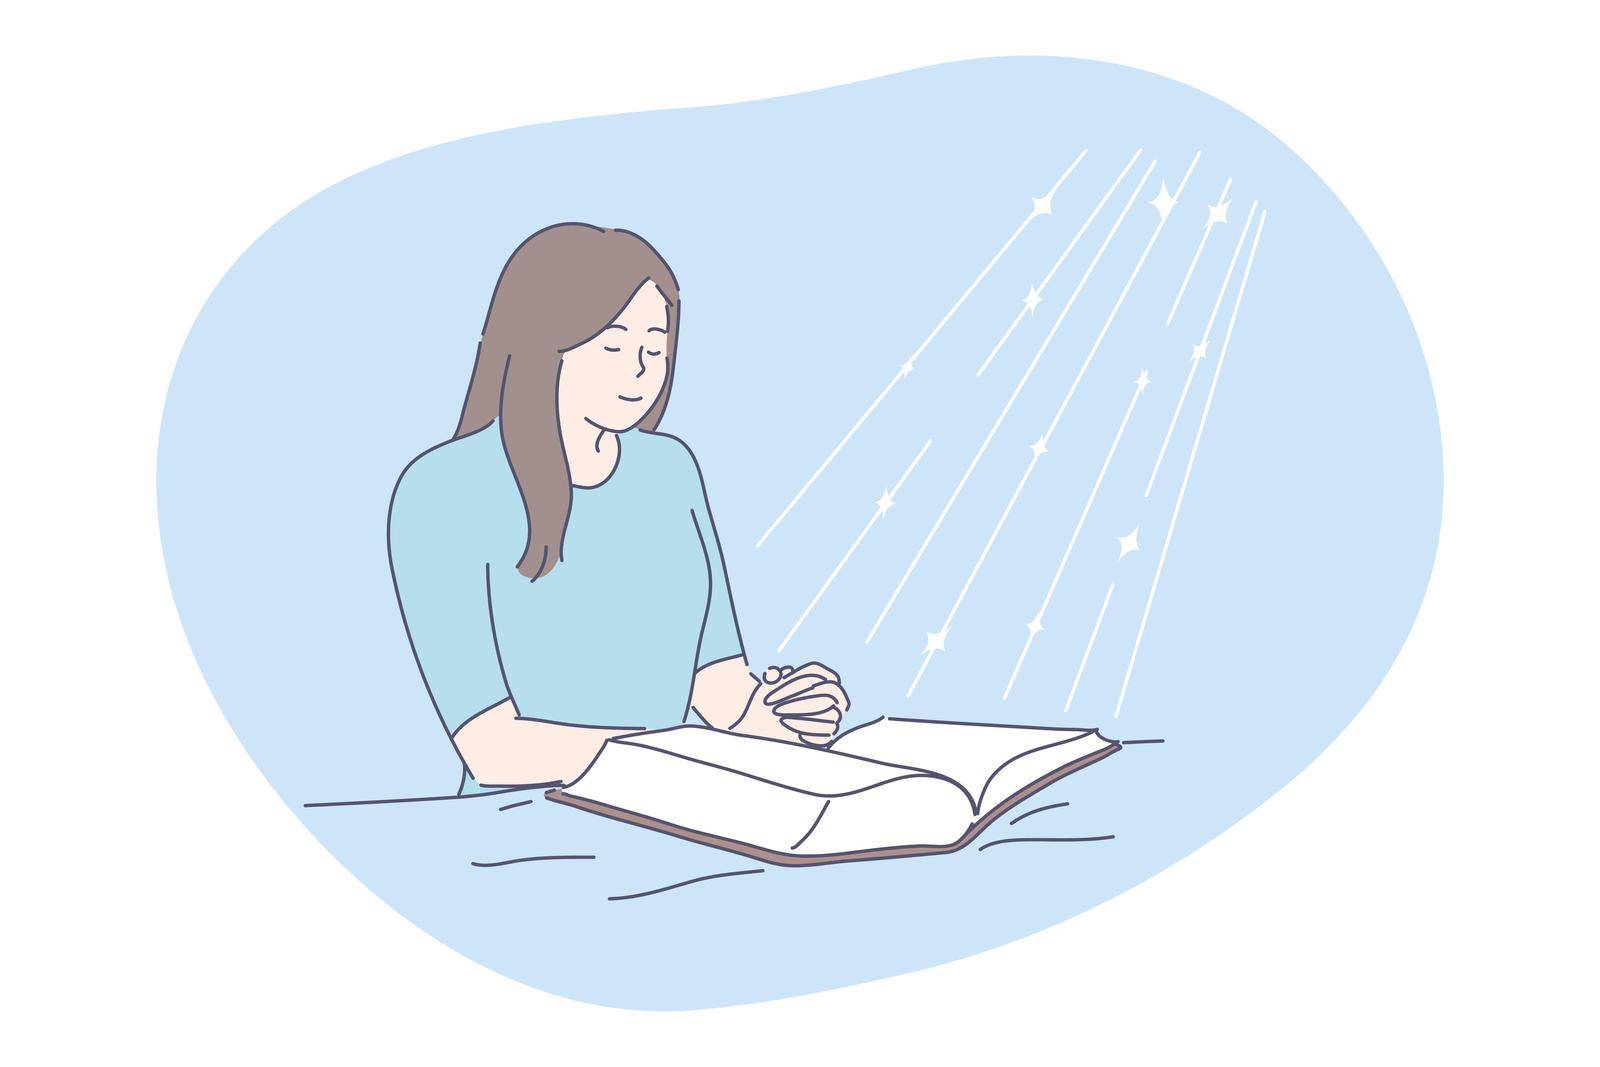 Prayer, religion, Bible concept. Young happy religious woman christian character praying above open Bible on bed. Asking and request or god lord faith and blessing cartoon vector illustration.